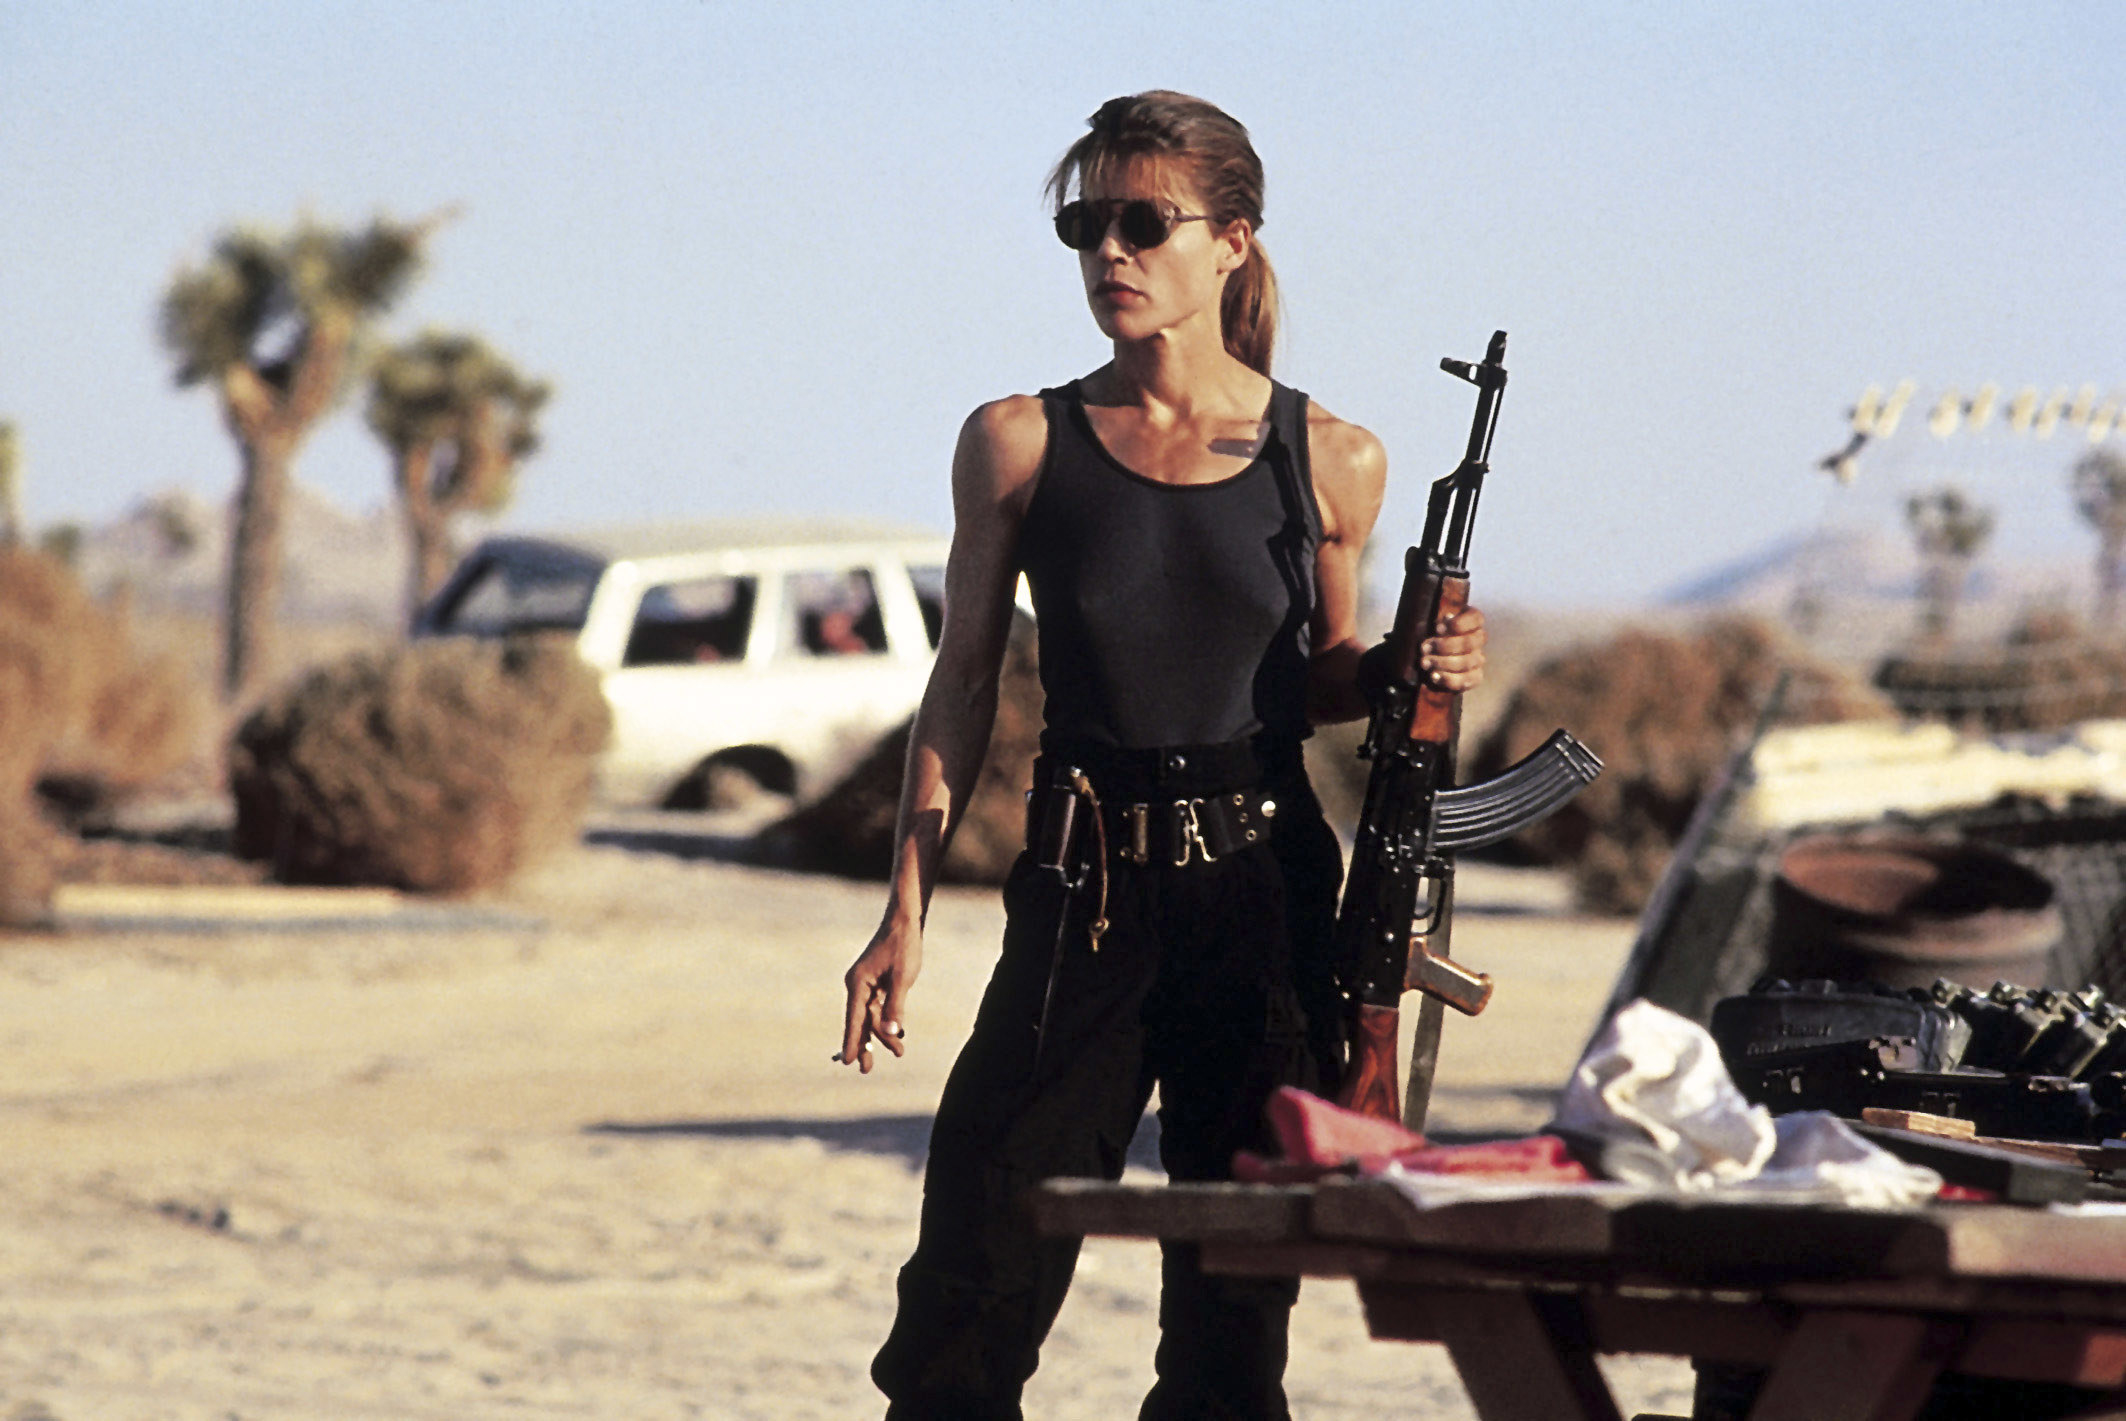 Sarah Connor standing in the dessert holding a rifle and looking bad ass